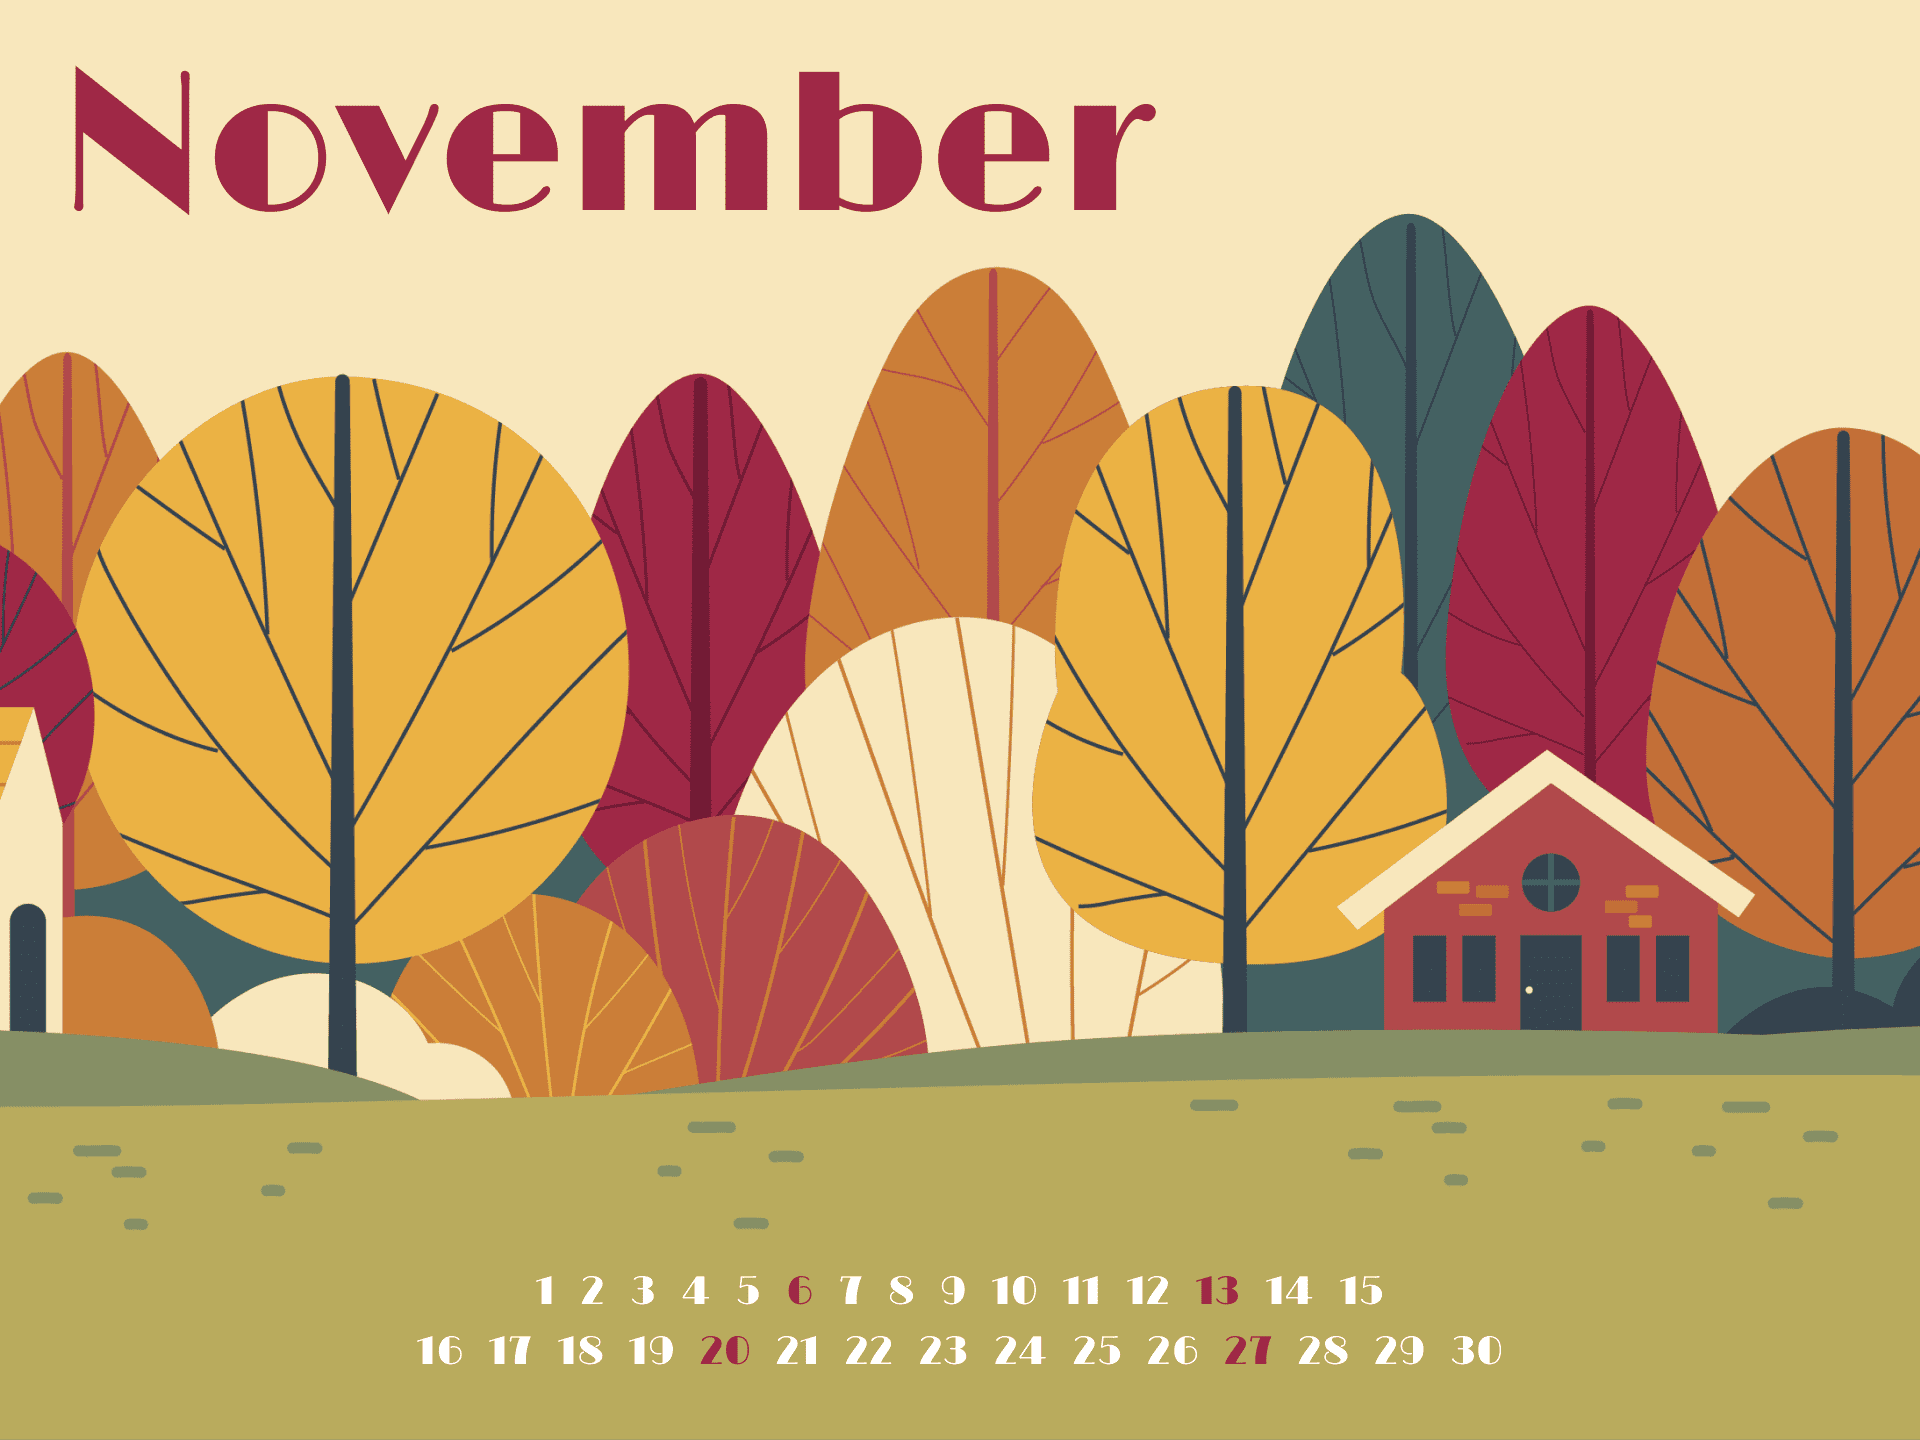 Free calendar for November, picture size 1920x1440.